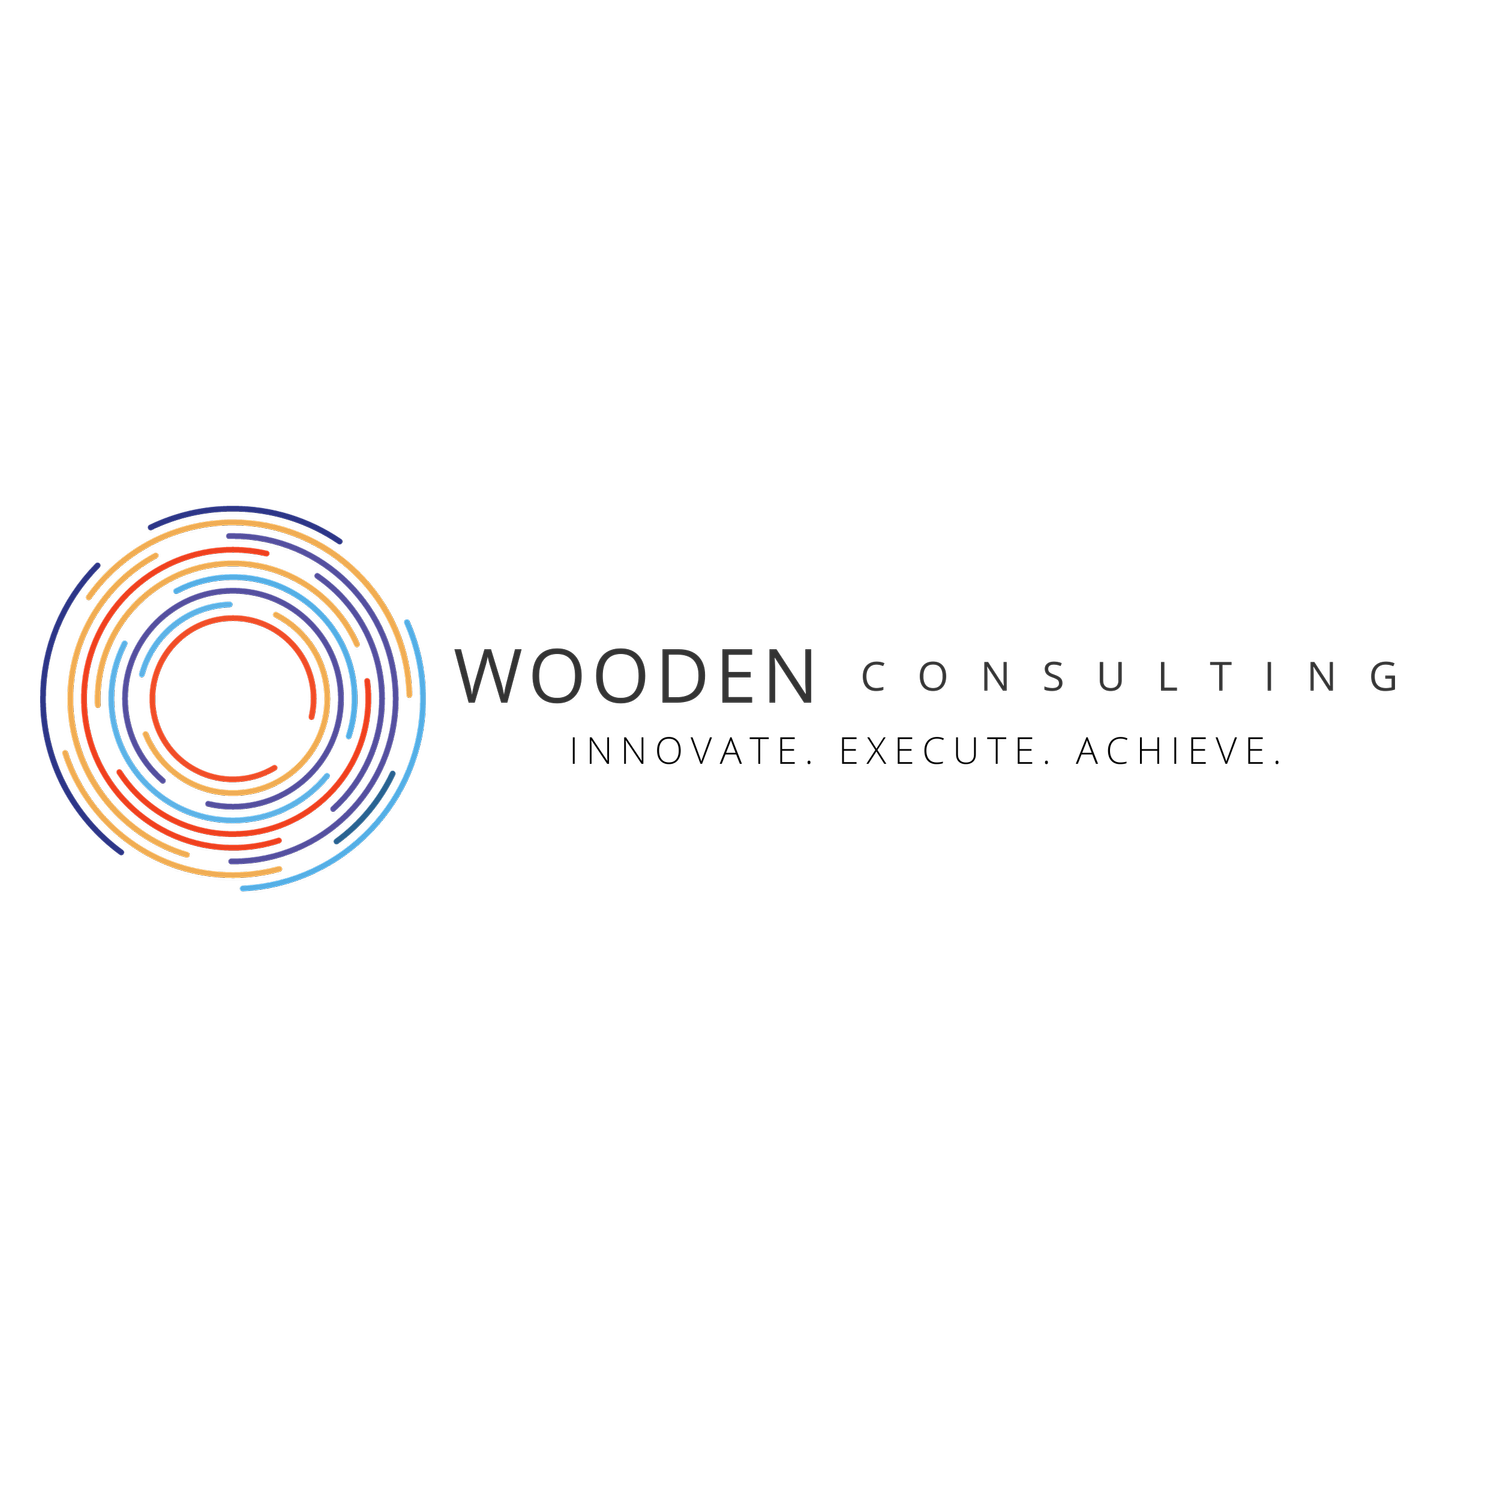 Wooden Consulting